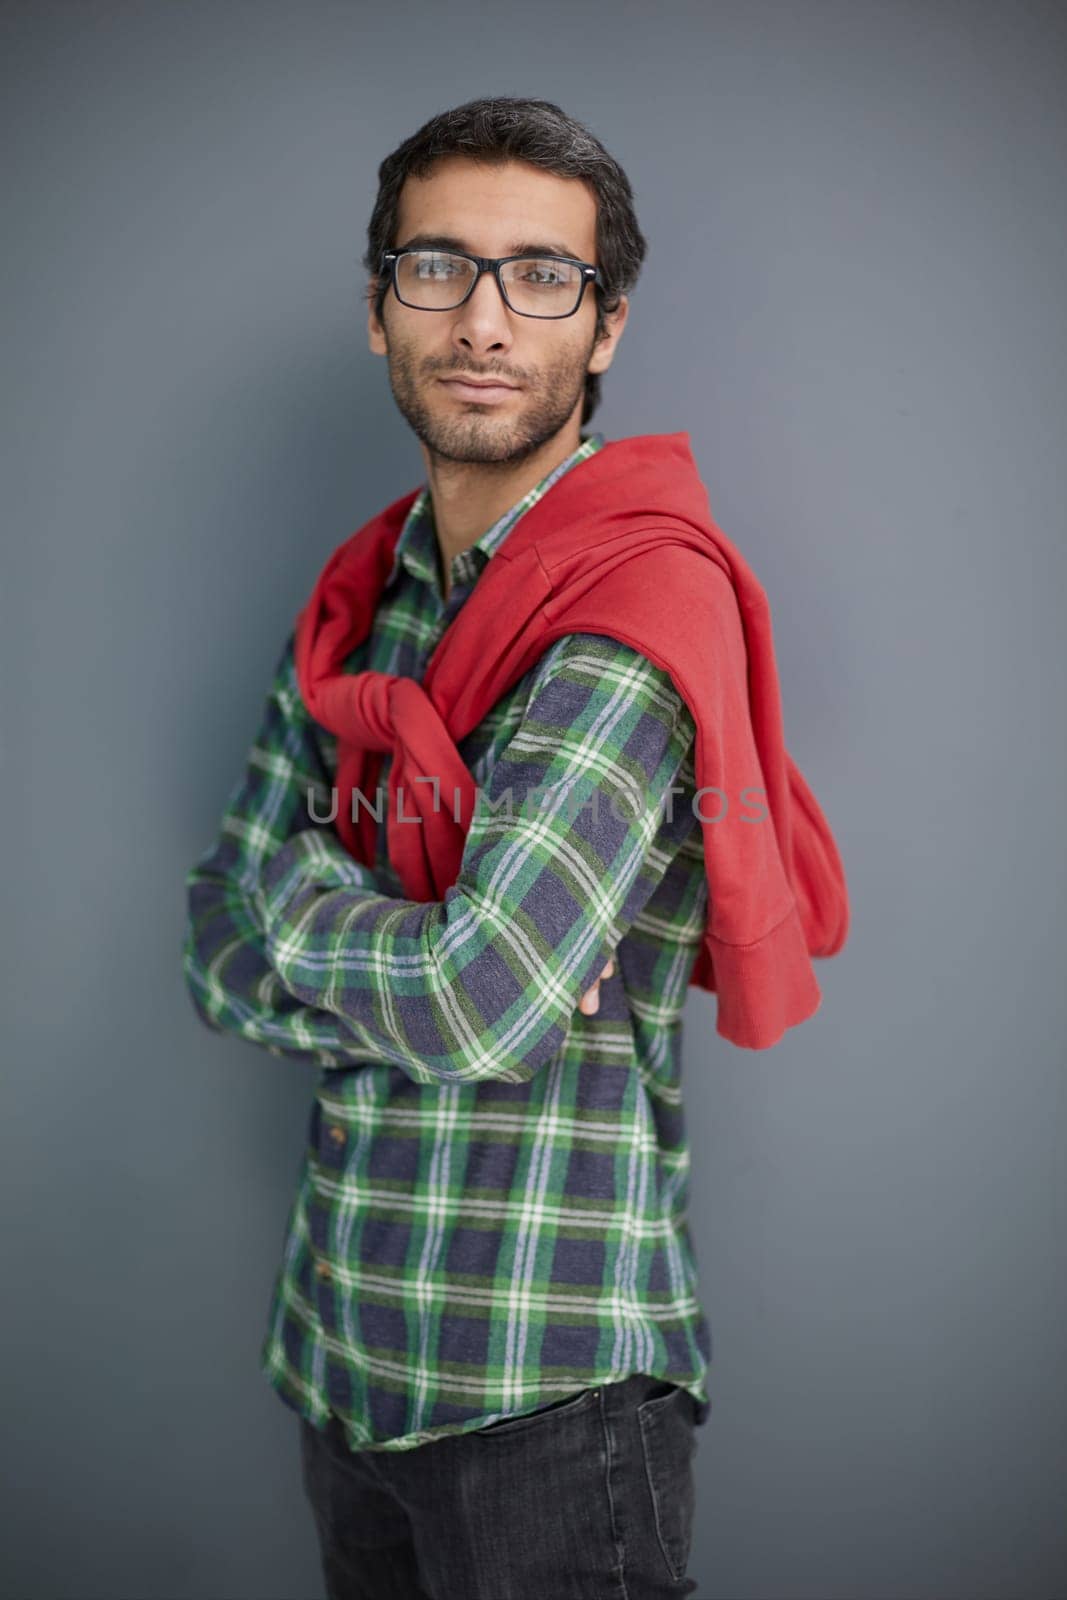 Stylish young man posing in the studio on gray background